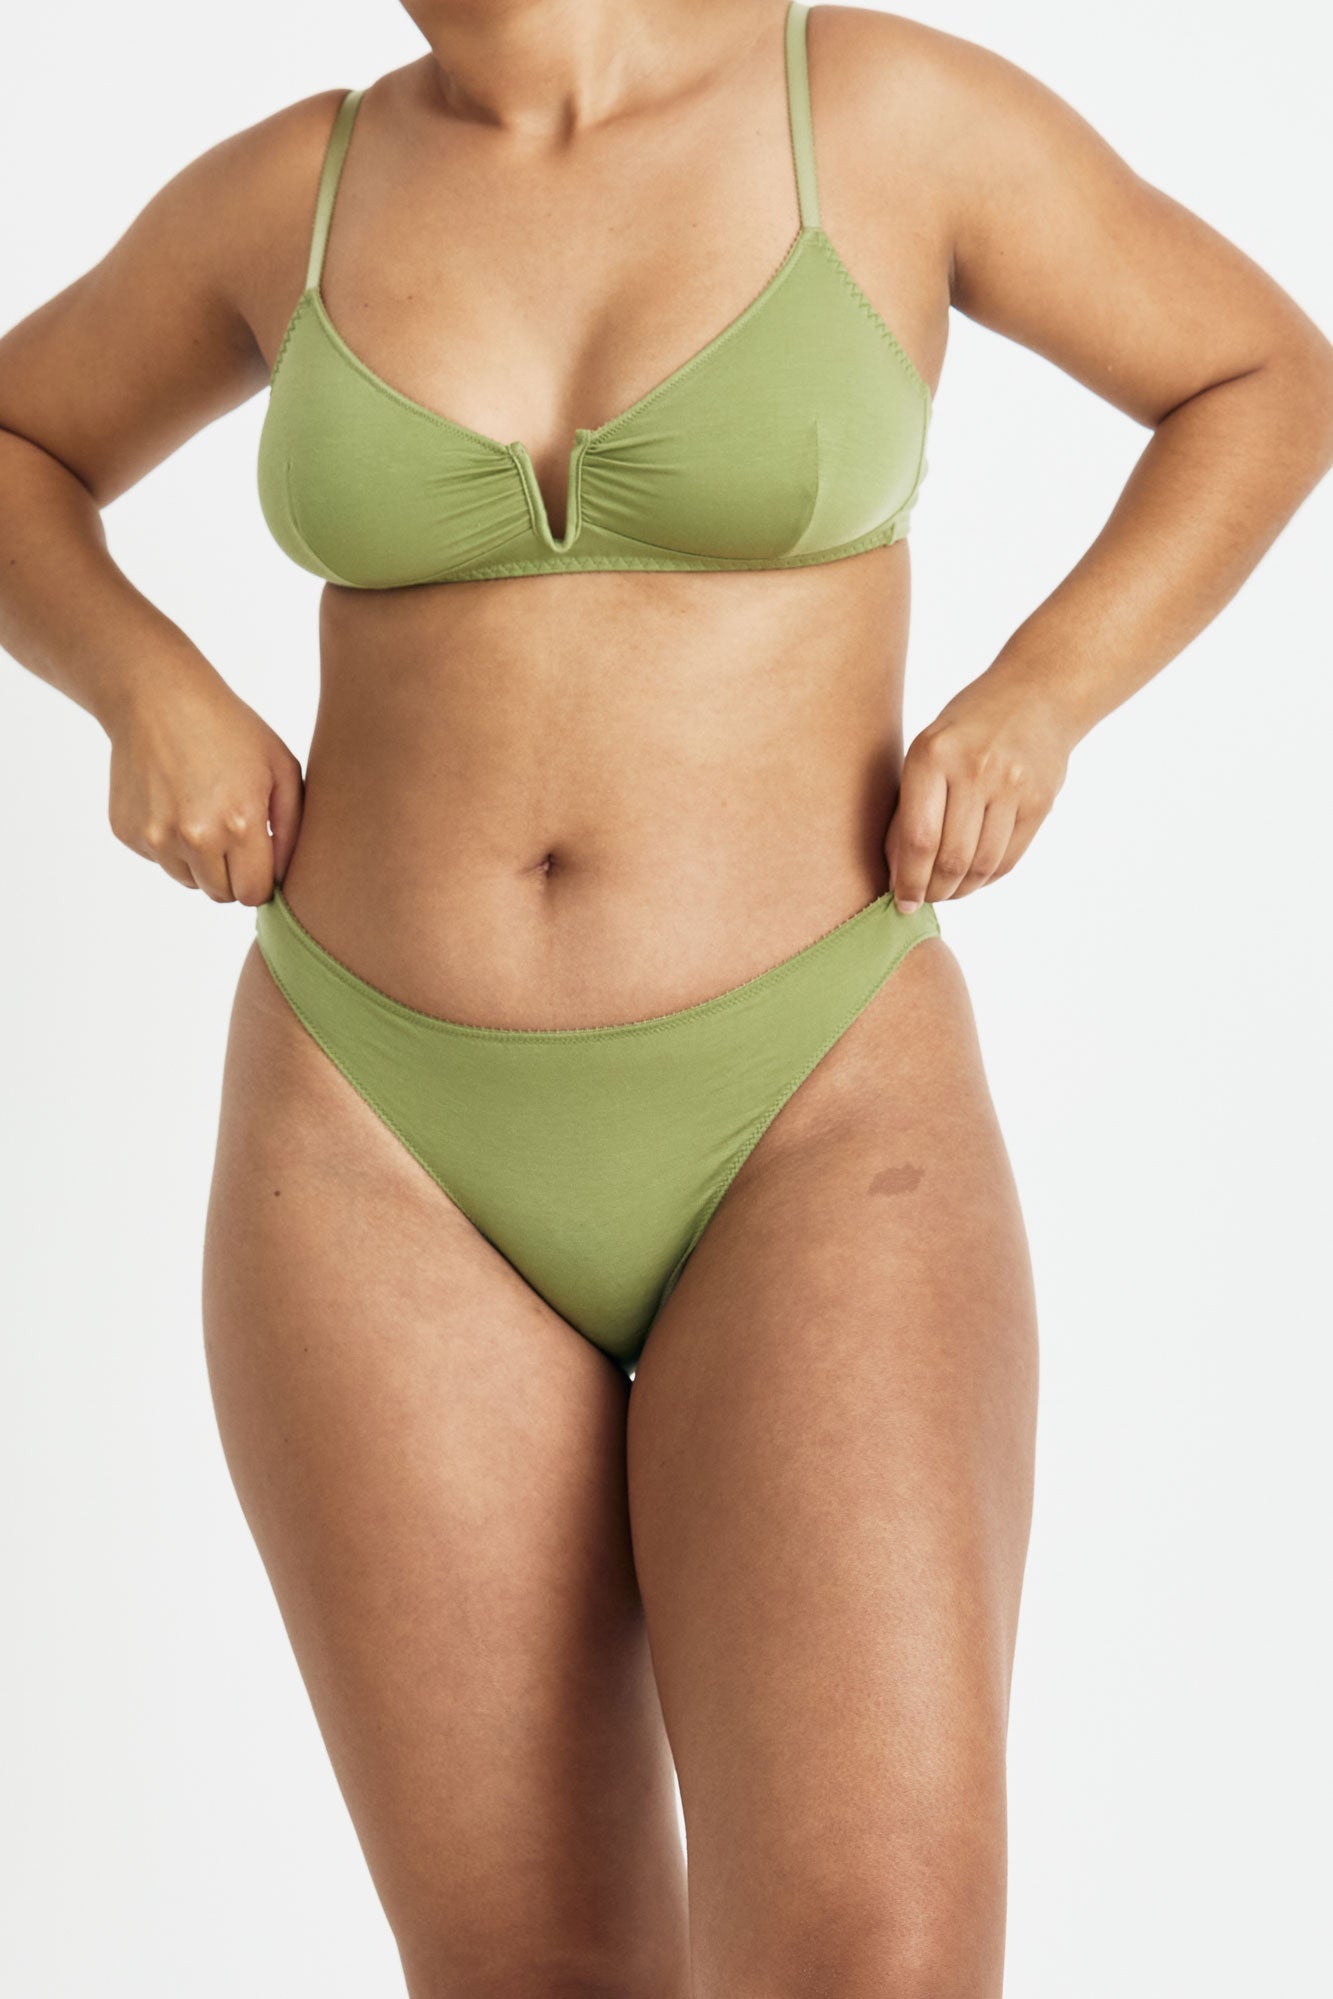 Videris Lingerie bikini knicker in olive TENCEL™  mid-rise style cut to follow the curve of your hips with soft elastics